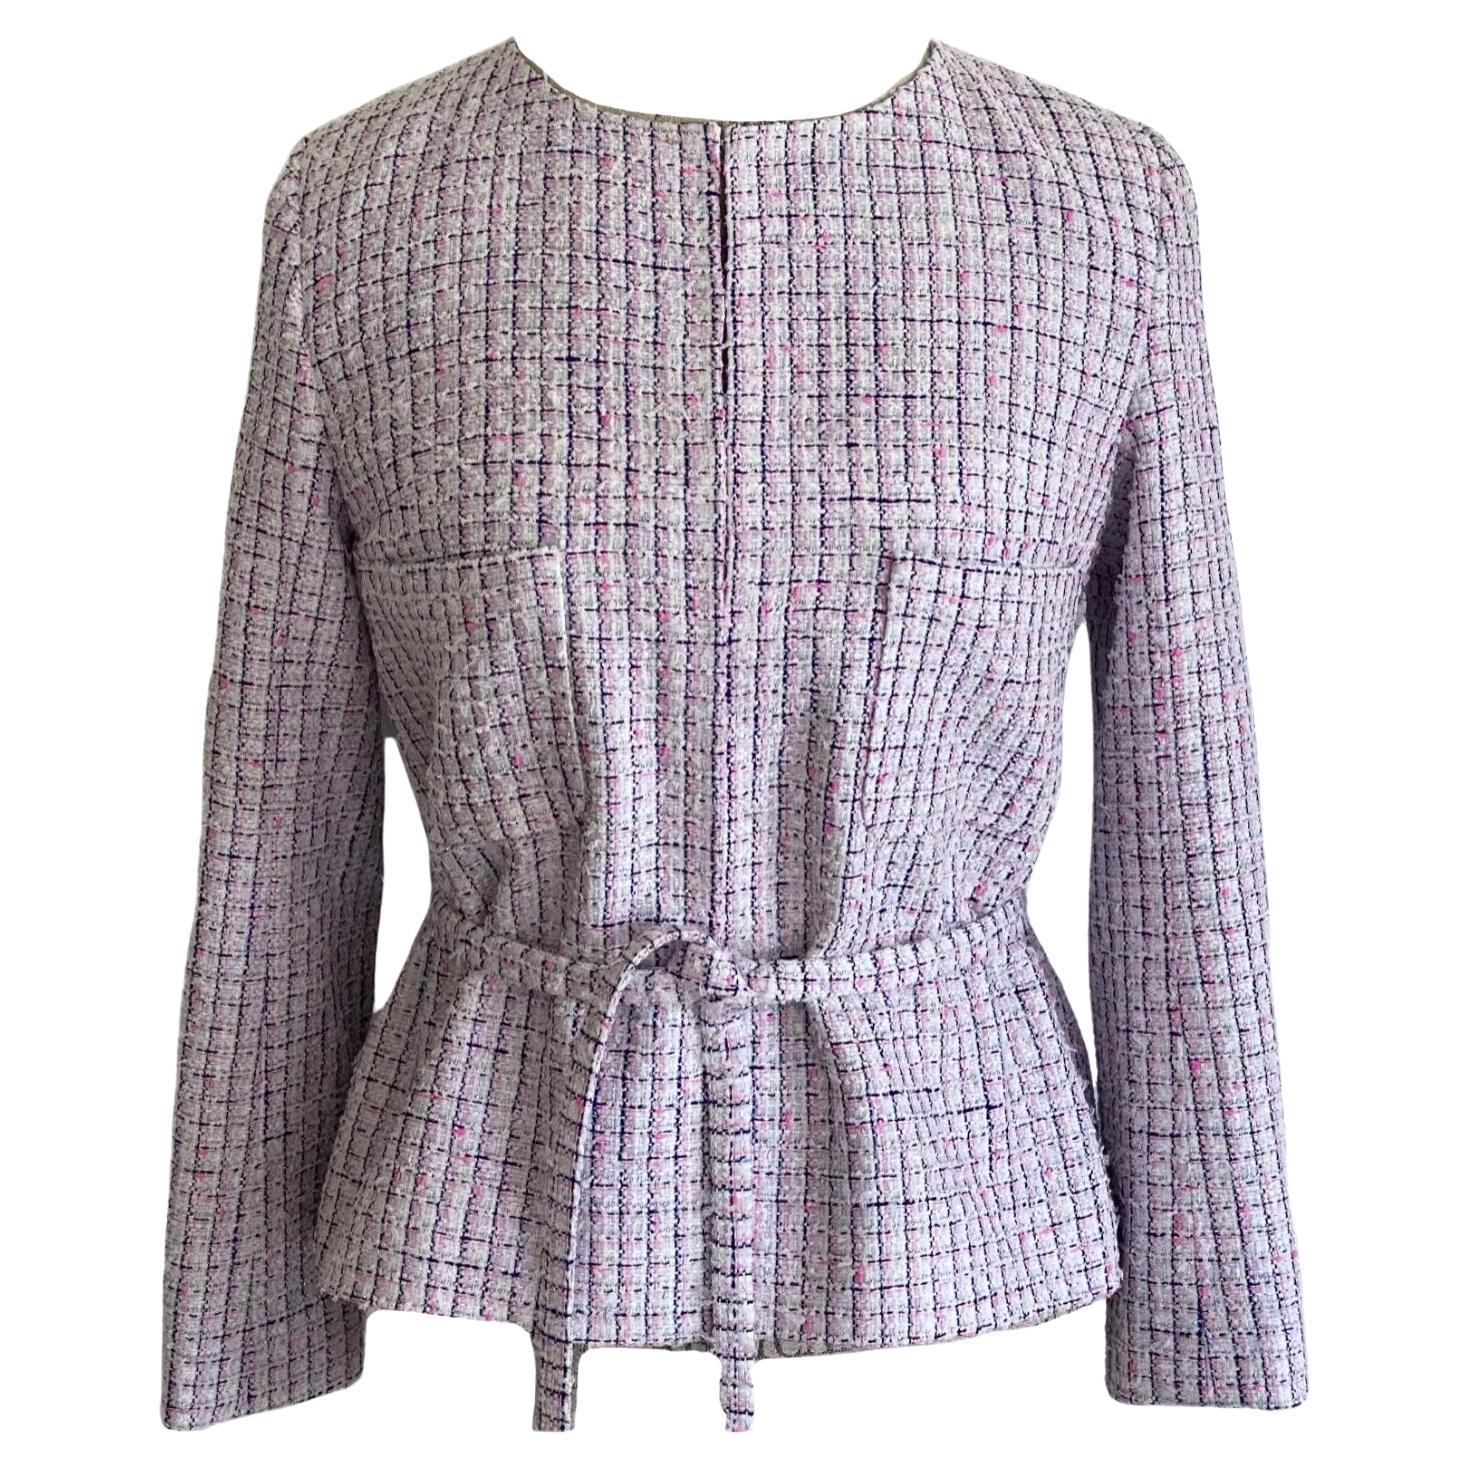 Chanel Lesage Tweed Jacket in Lilac For Sale